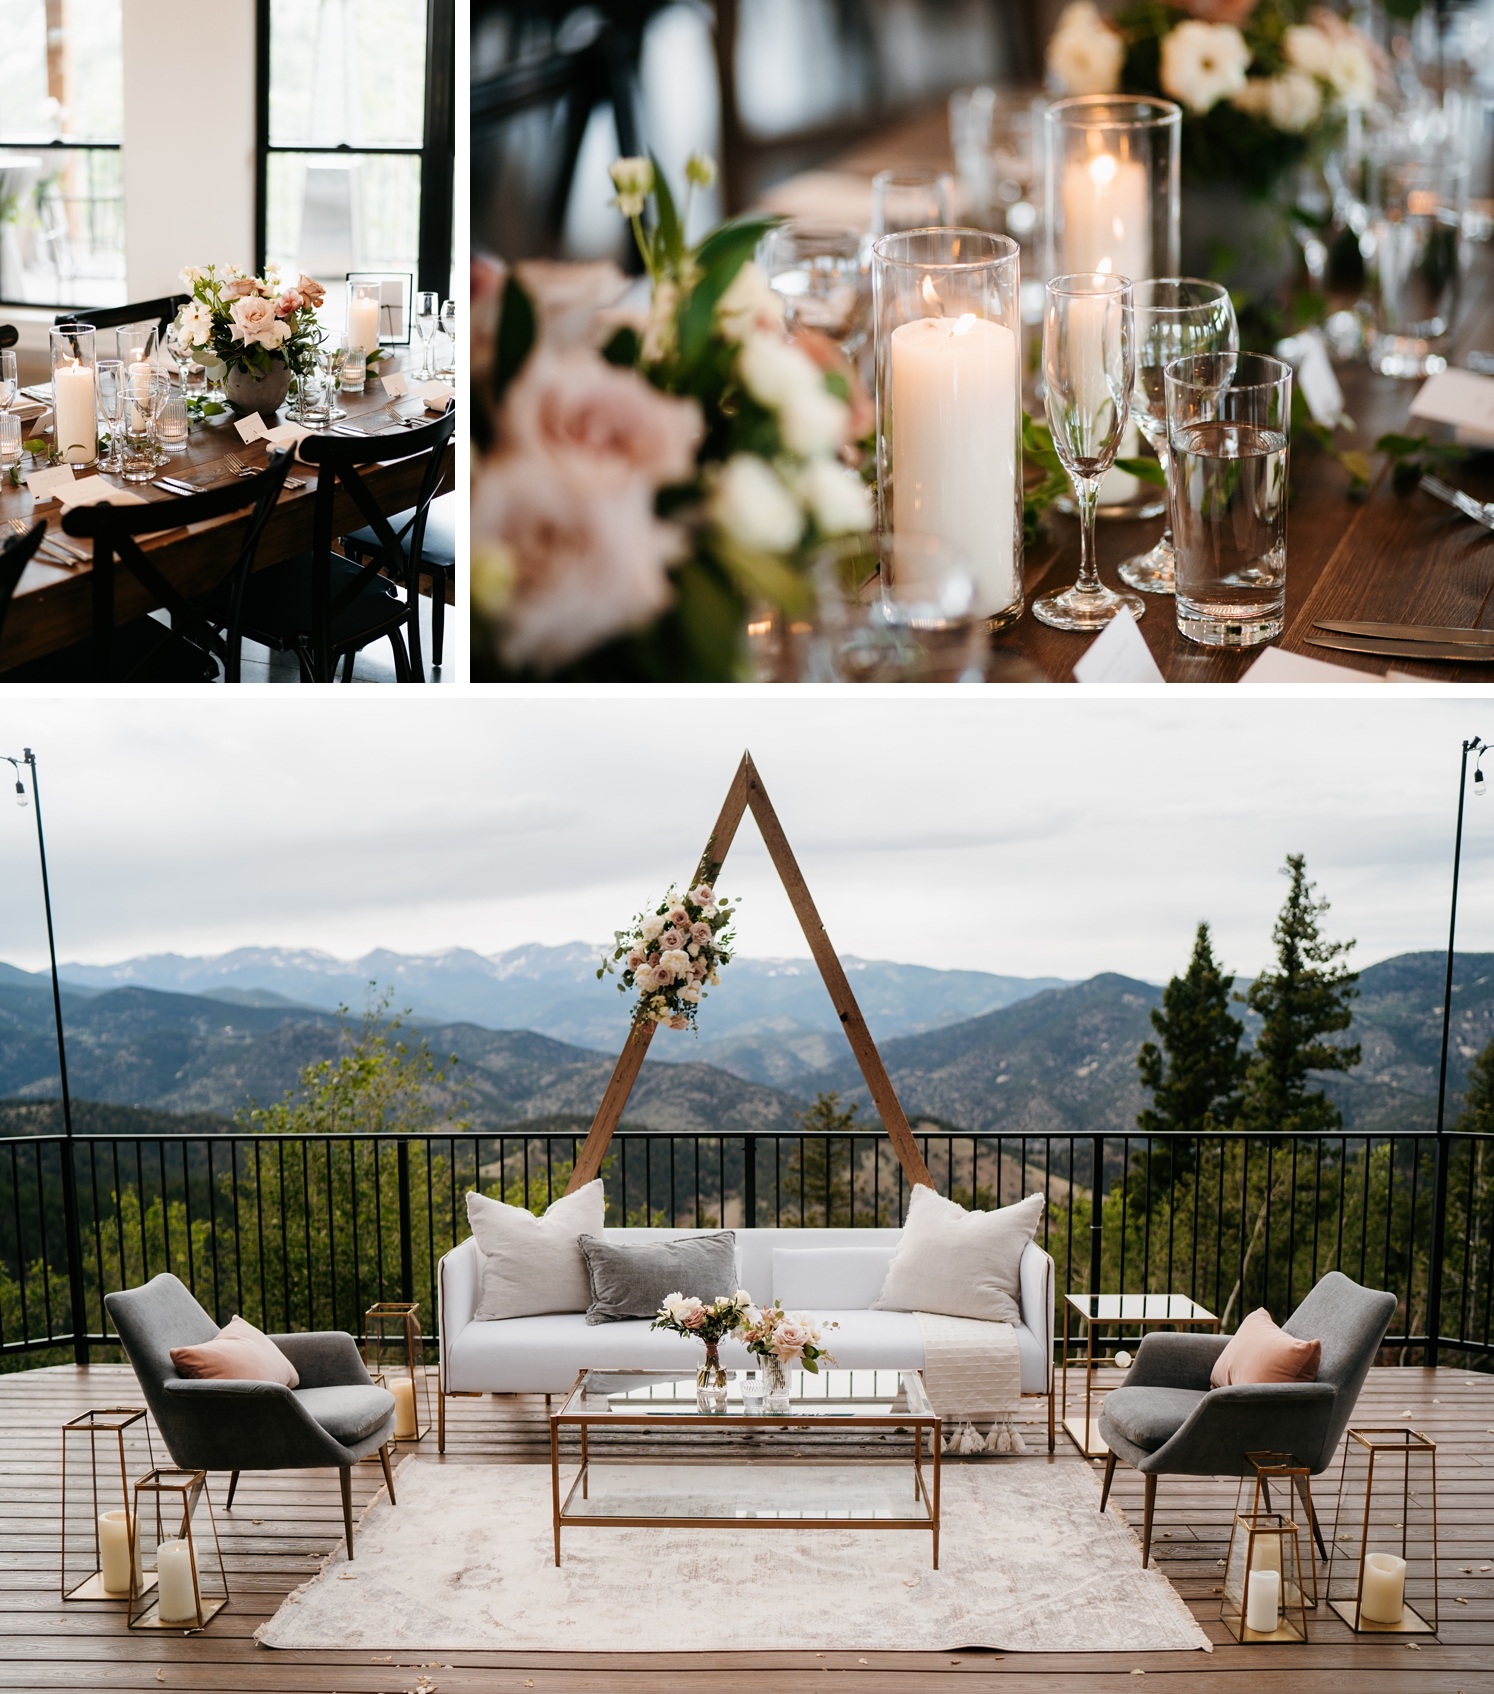 White candles and pink flower arrangements on reception tables at North Star Gatherings | white candles and crystal glasses on reception table | triangle arch and lounge set on deck at North Star Gatherings | McArthur Weddings and Events